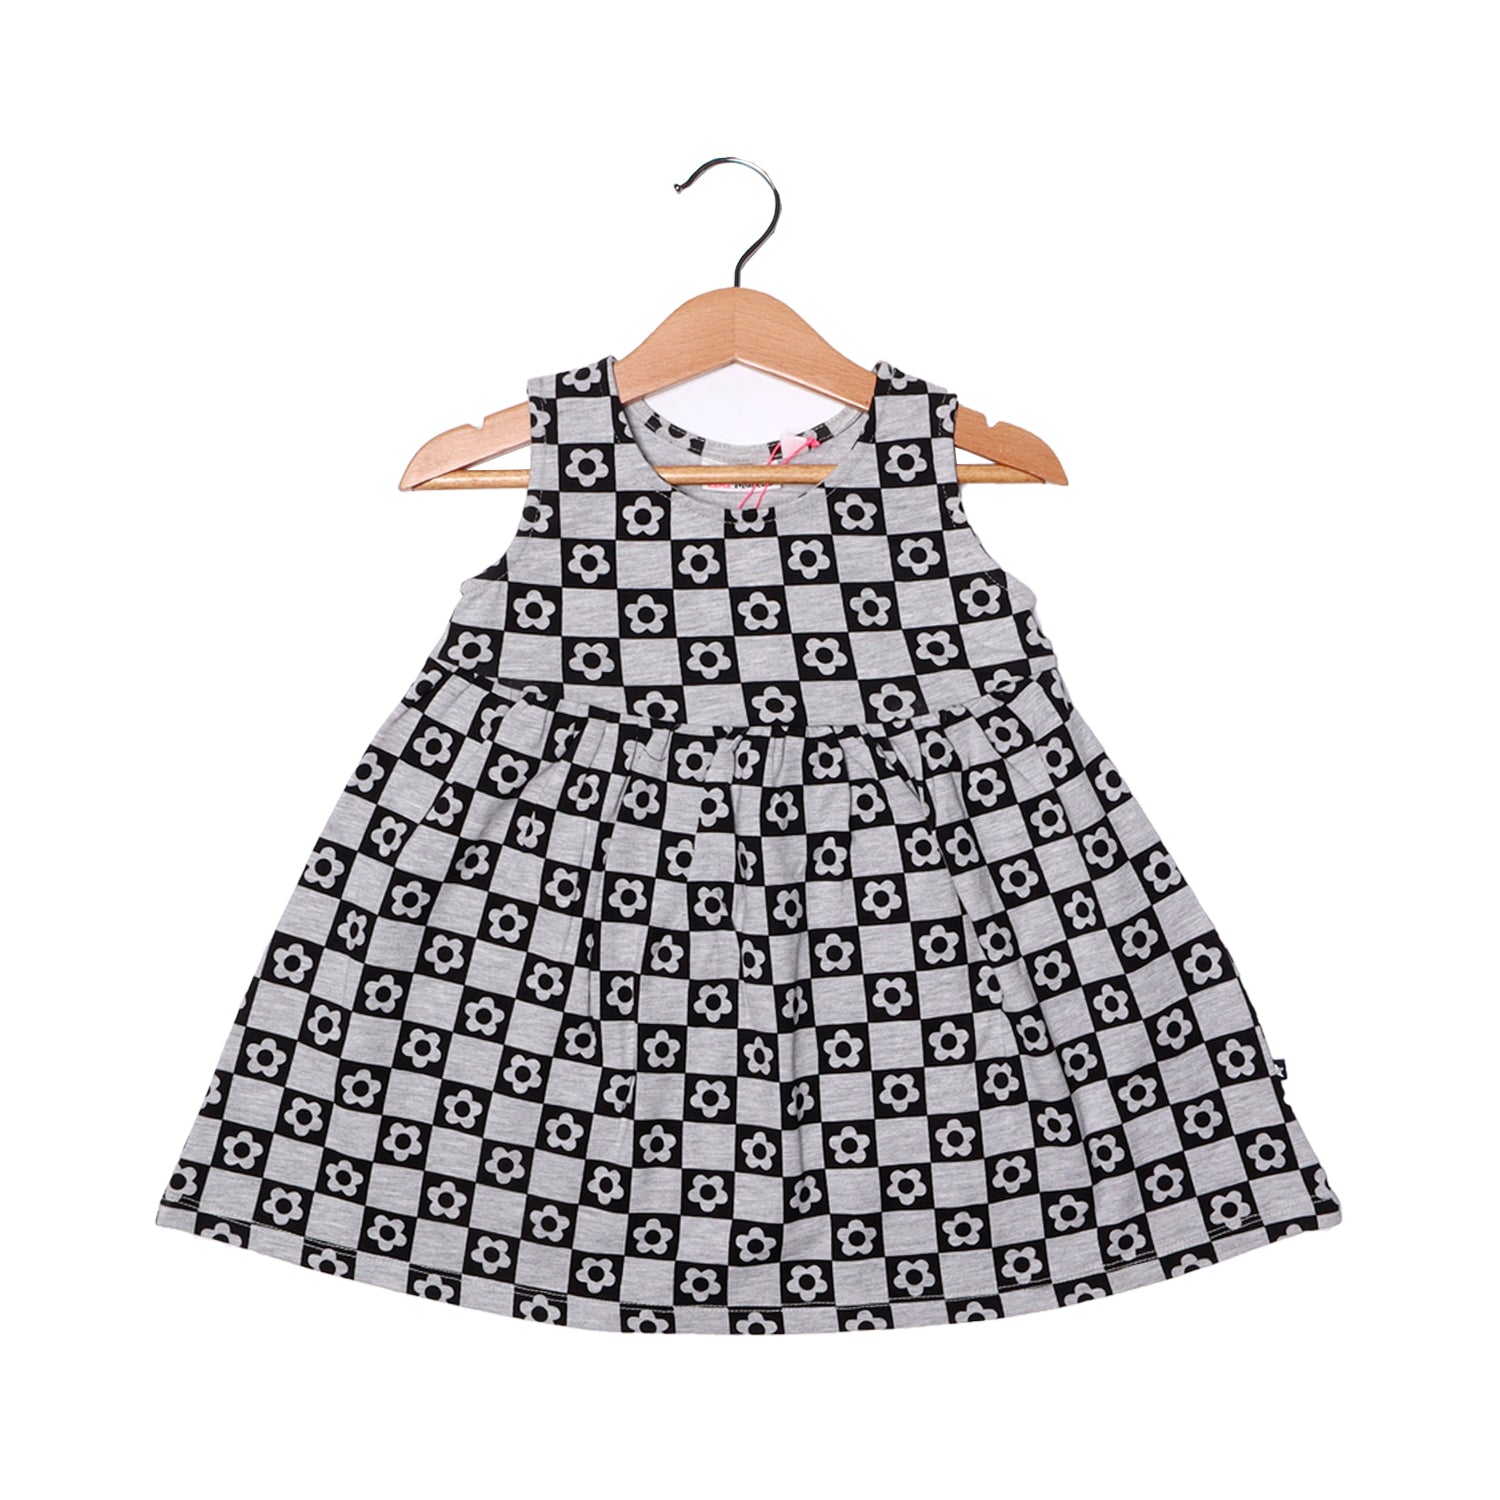 GREY WITH BLACK FLOWER PRINTED FROCK FOR GIRLS